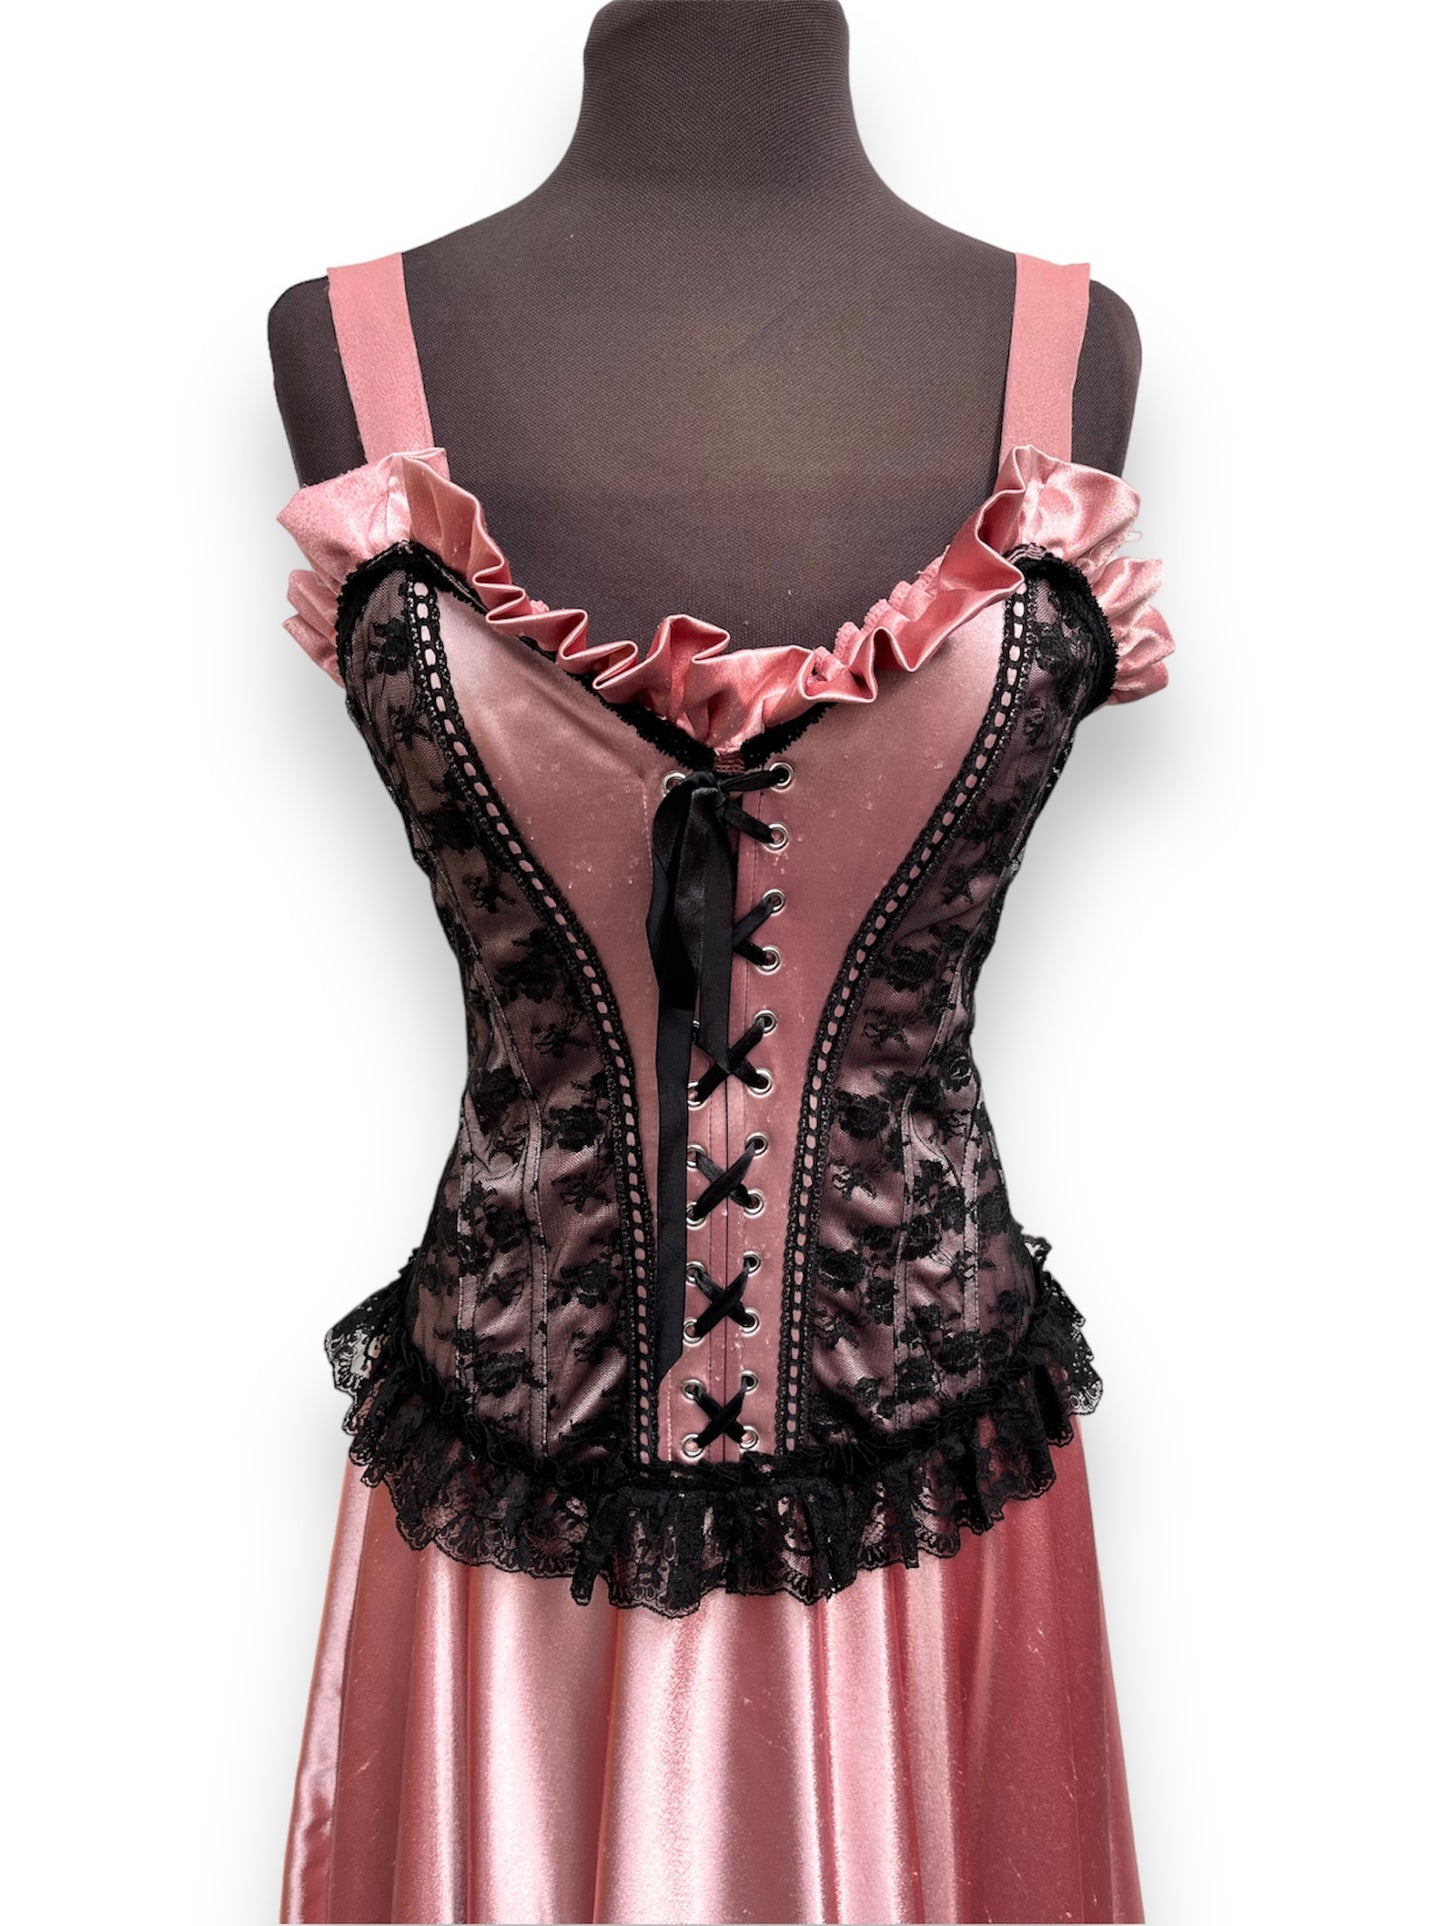 Stunning Pink Show Girl Saloon Girl Dress Size 8-10 Ex Hire Moulin Rouge